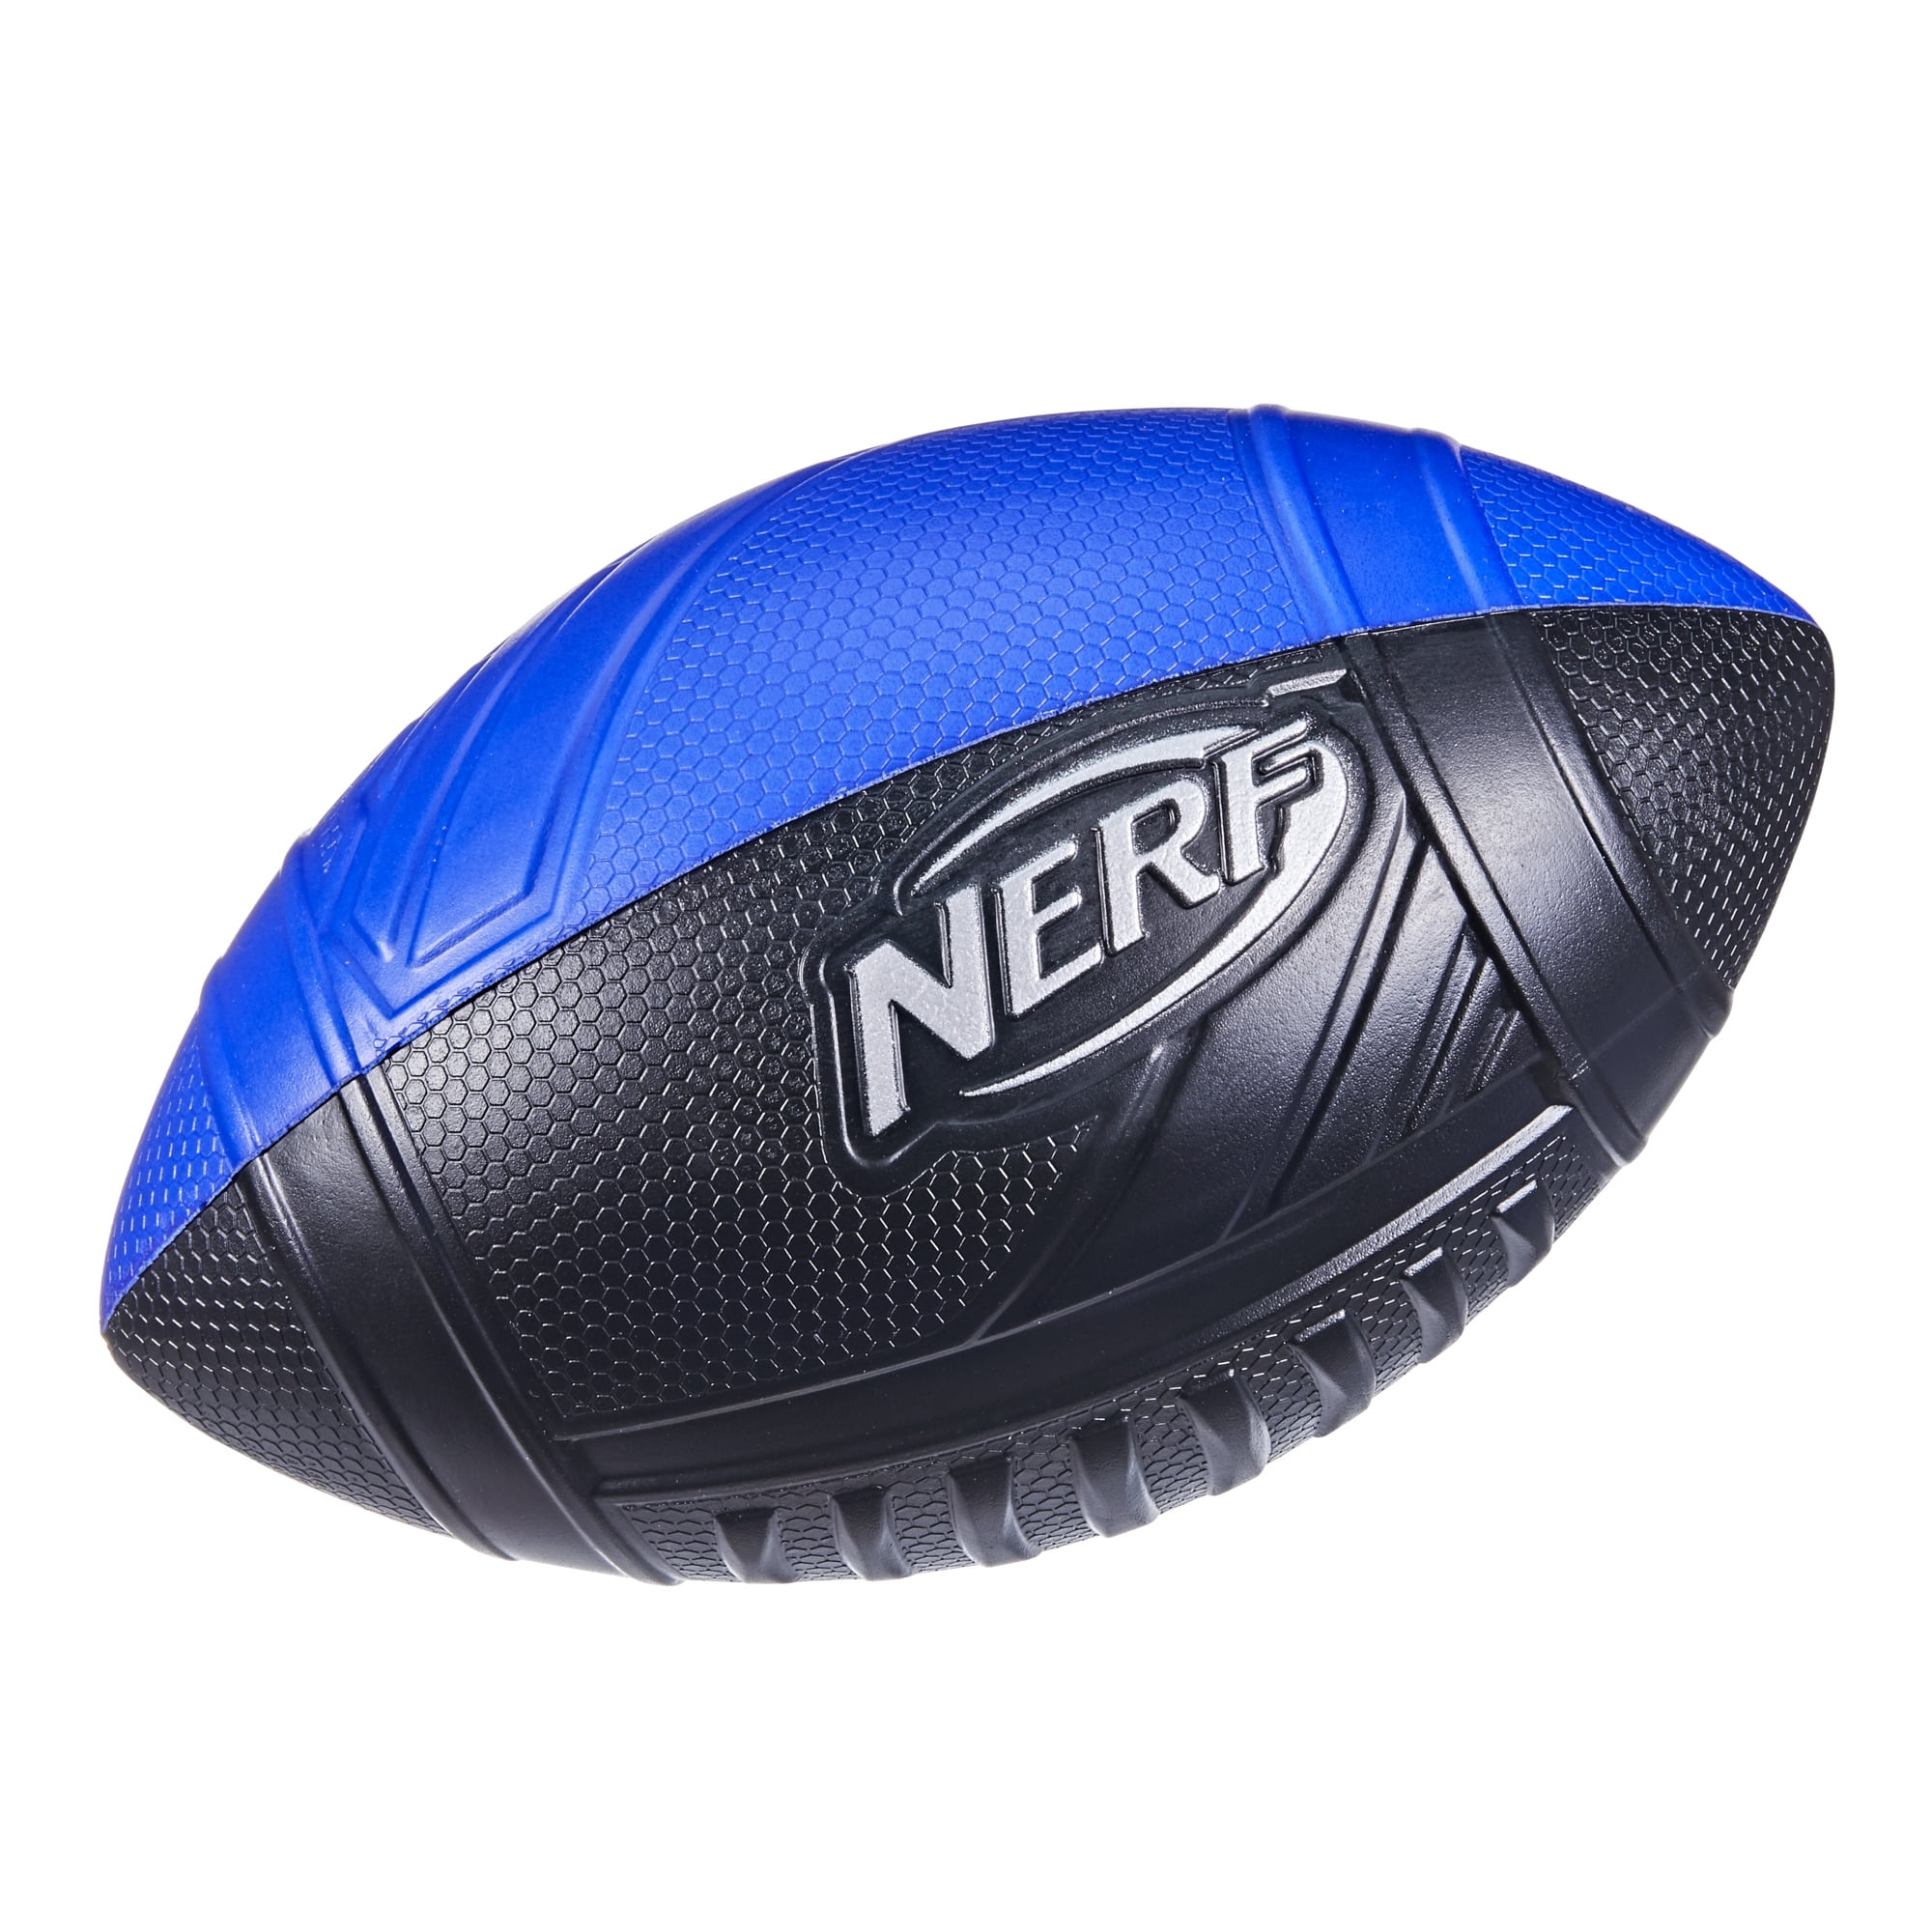 Nerf Pro Grip Classic Foam Football, Easy to Catch and Throw